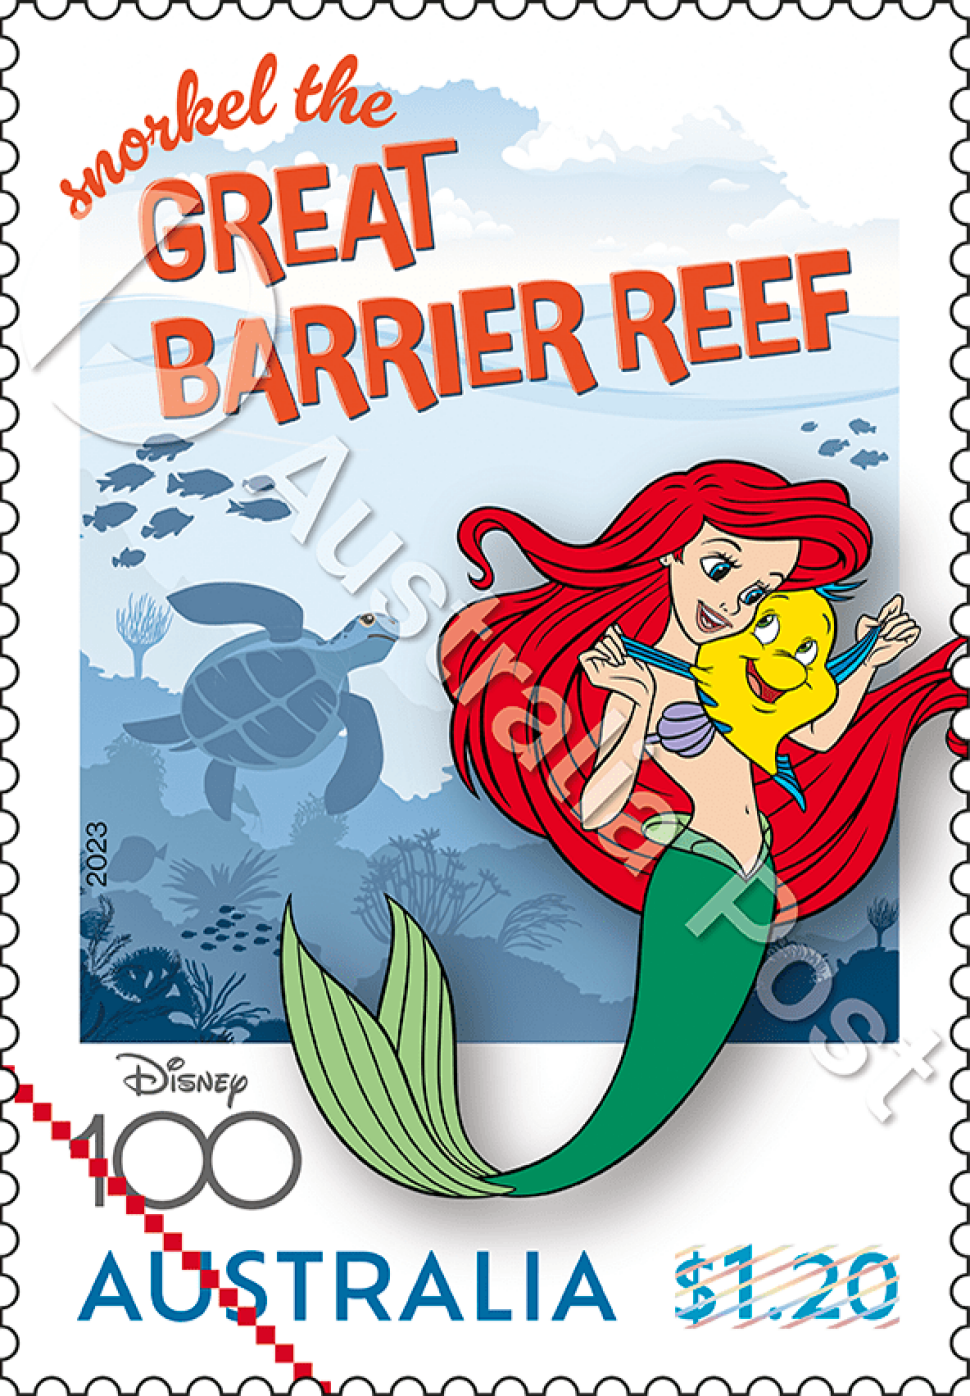 $1.20 Ariel at the Great Barrier Reef, QLD stamp